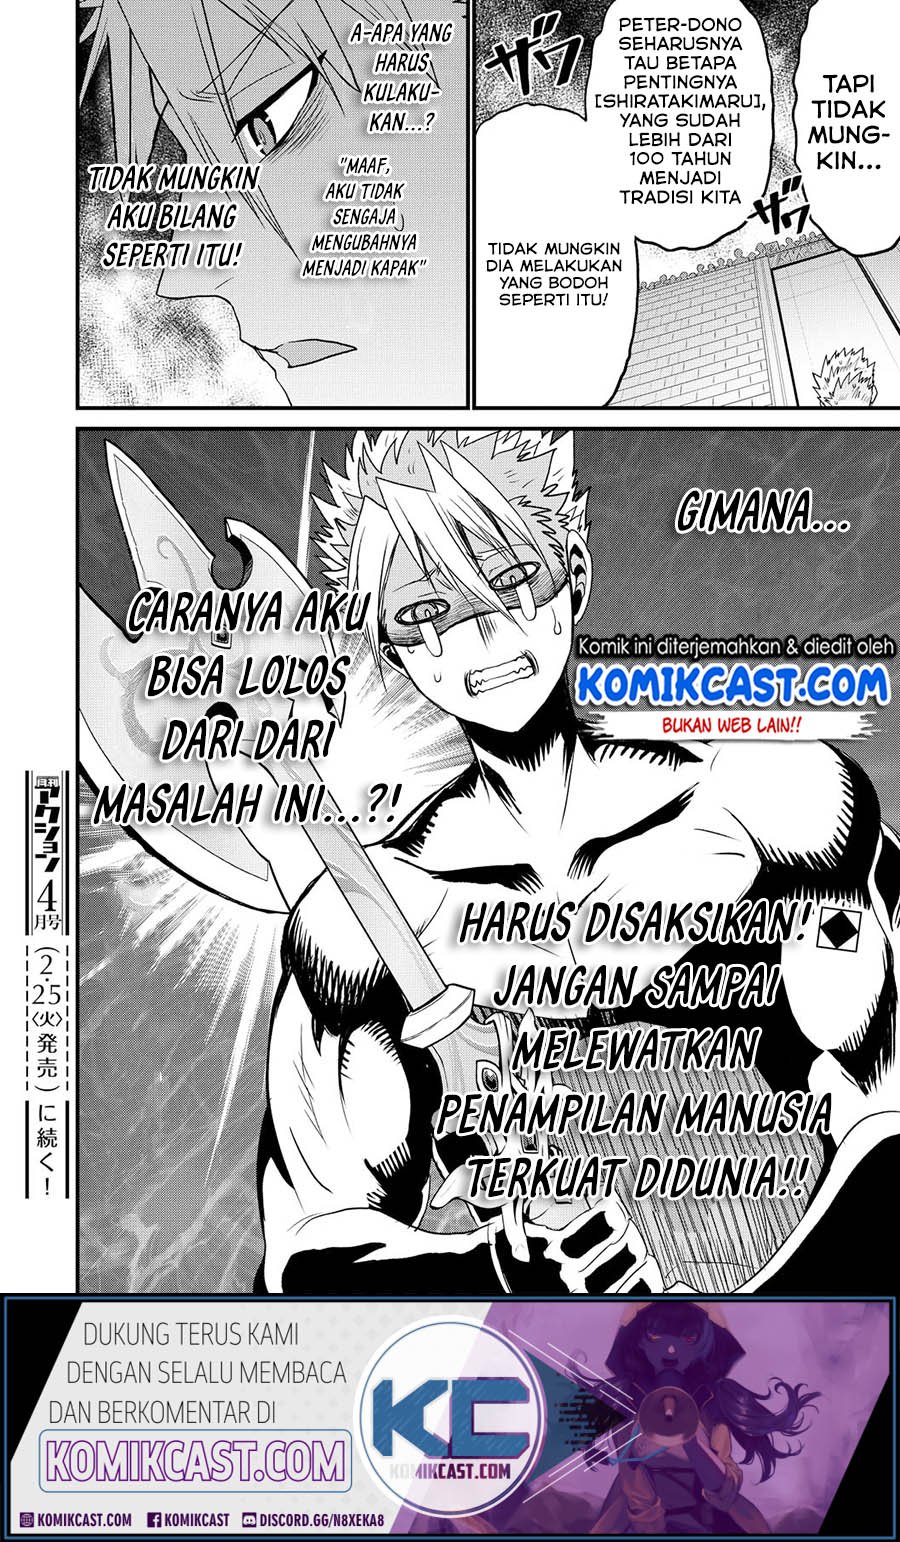 Peter Grill to Kenja no Jikan Chapter 25-2